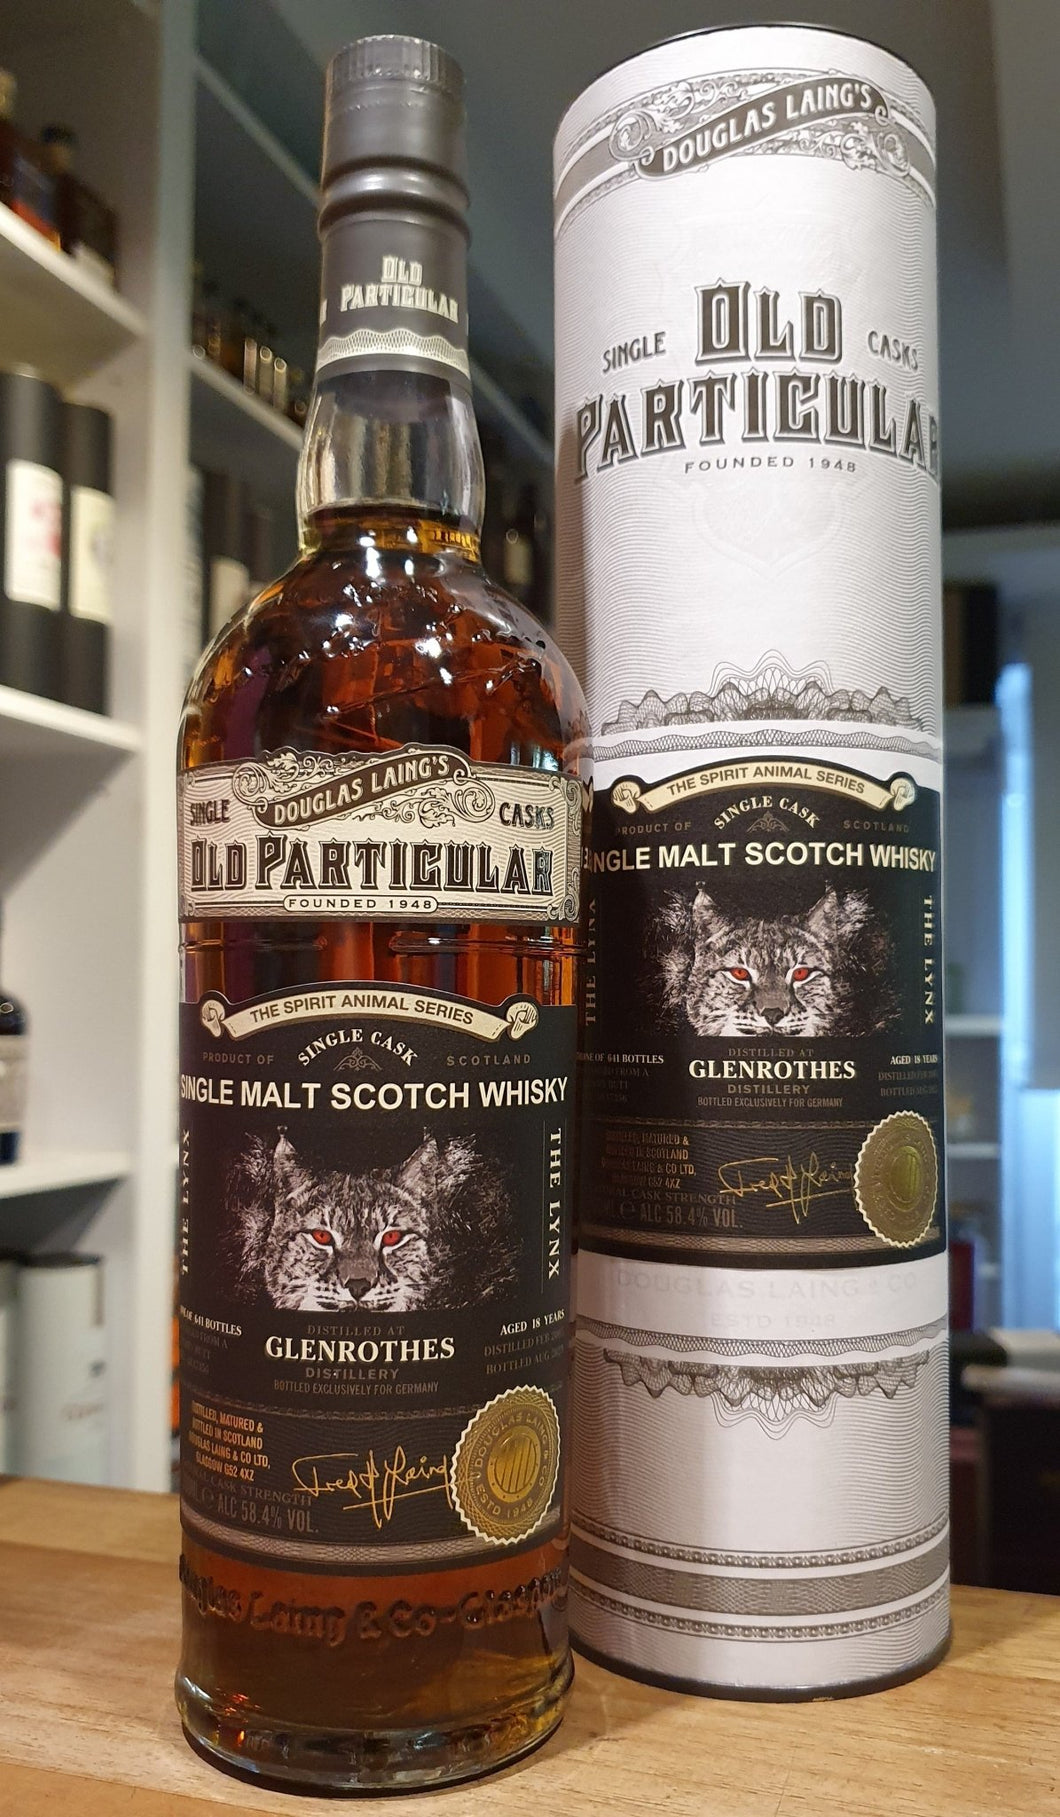 Glenrothes single cask 2005 2023 18y Old Particular 58,4% vol. 0,7l  Whisky Douglas Laing sherry butt DL17356 the spirit animal series the lynx   limitiert auf 641  Flaschen 